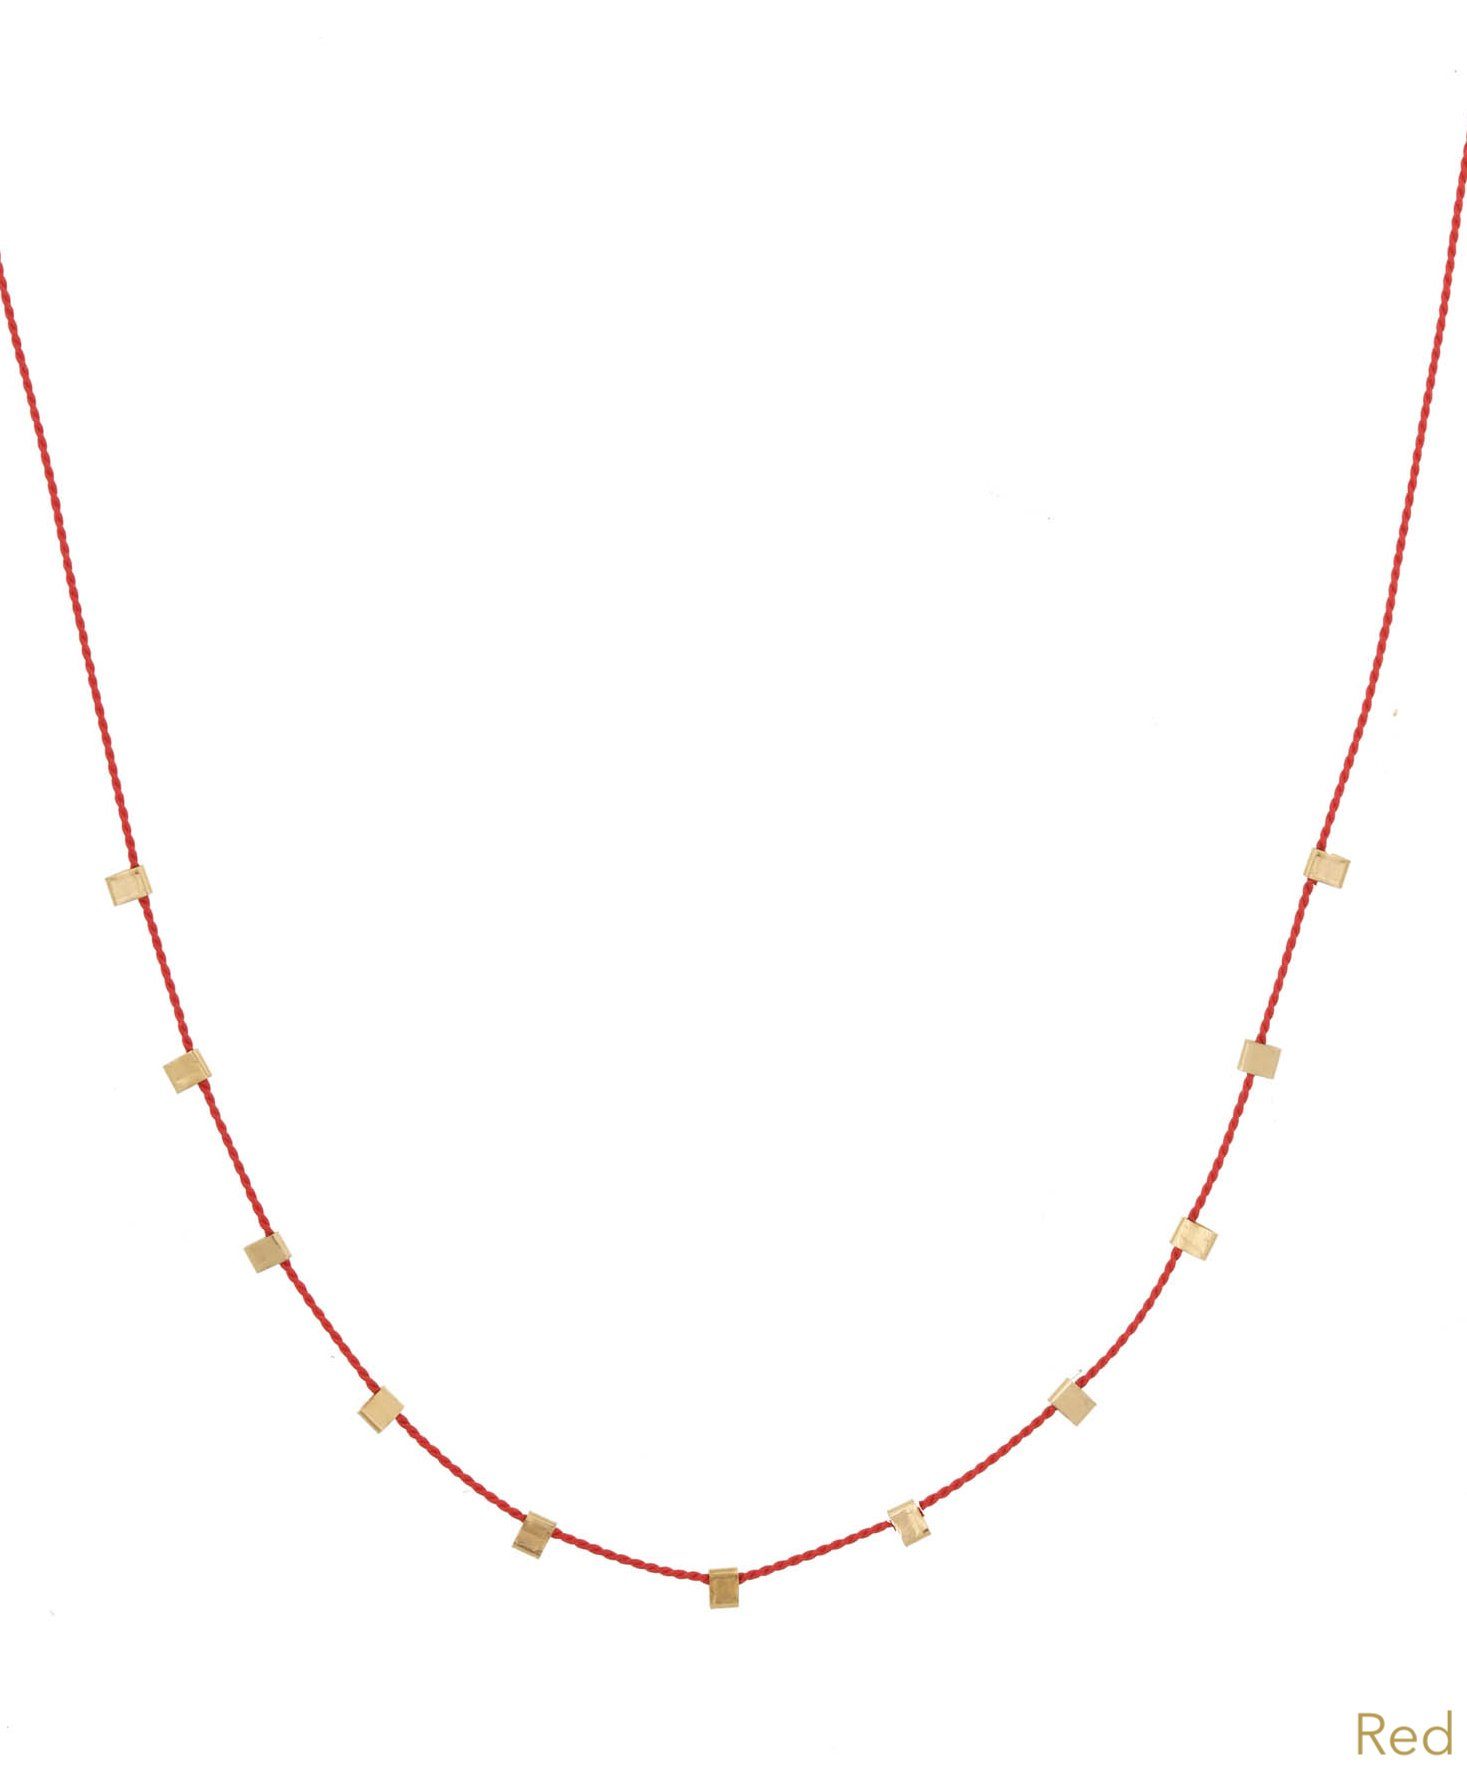 Hilo Necklace by KOZAKH. A 16 inch long natural silk thread necklace, embellished with 14K Gold Filled square cut metals.